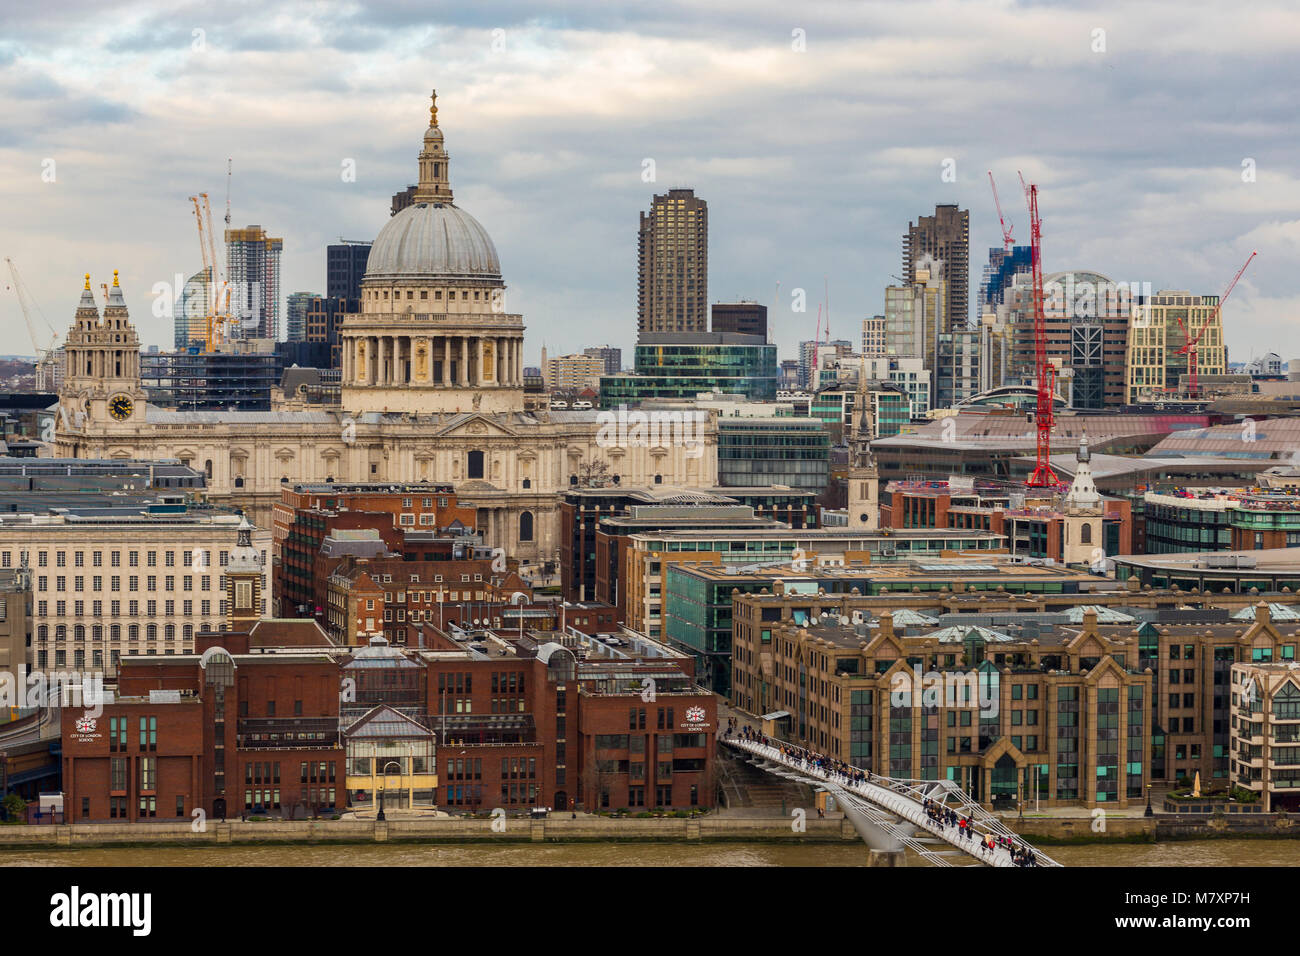 LONDON, UK – JAN 2018: St. Paul's cathedral with Millenium bridge in foreground Stock Photo